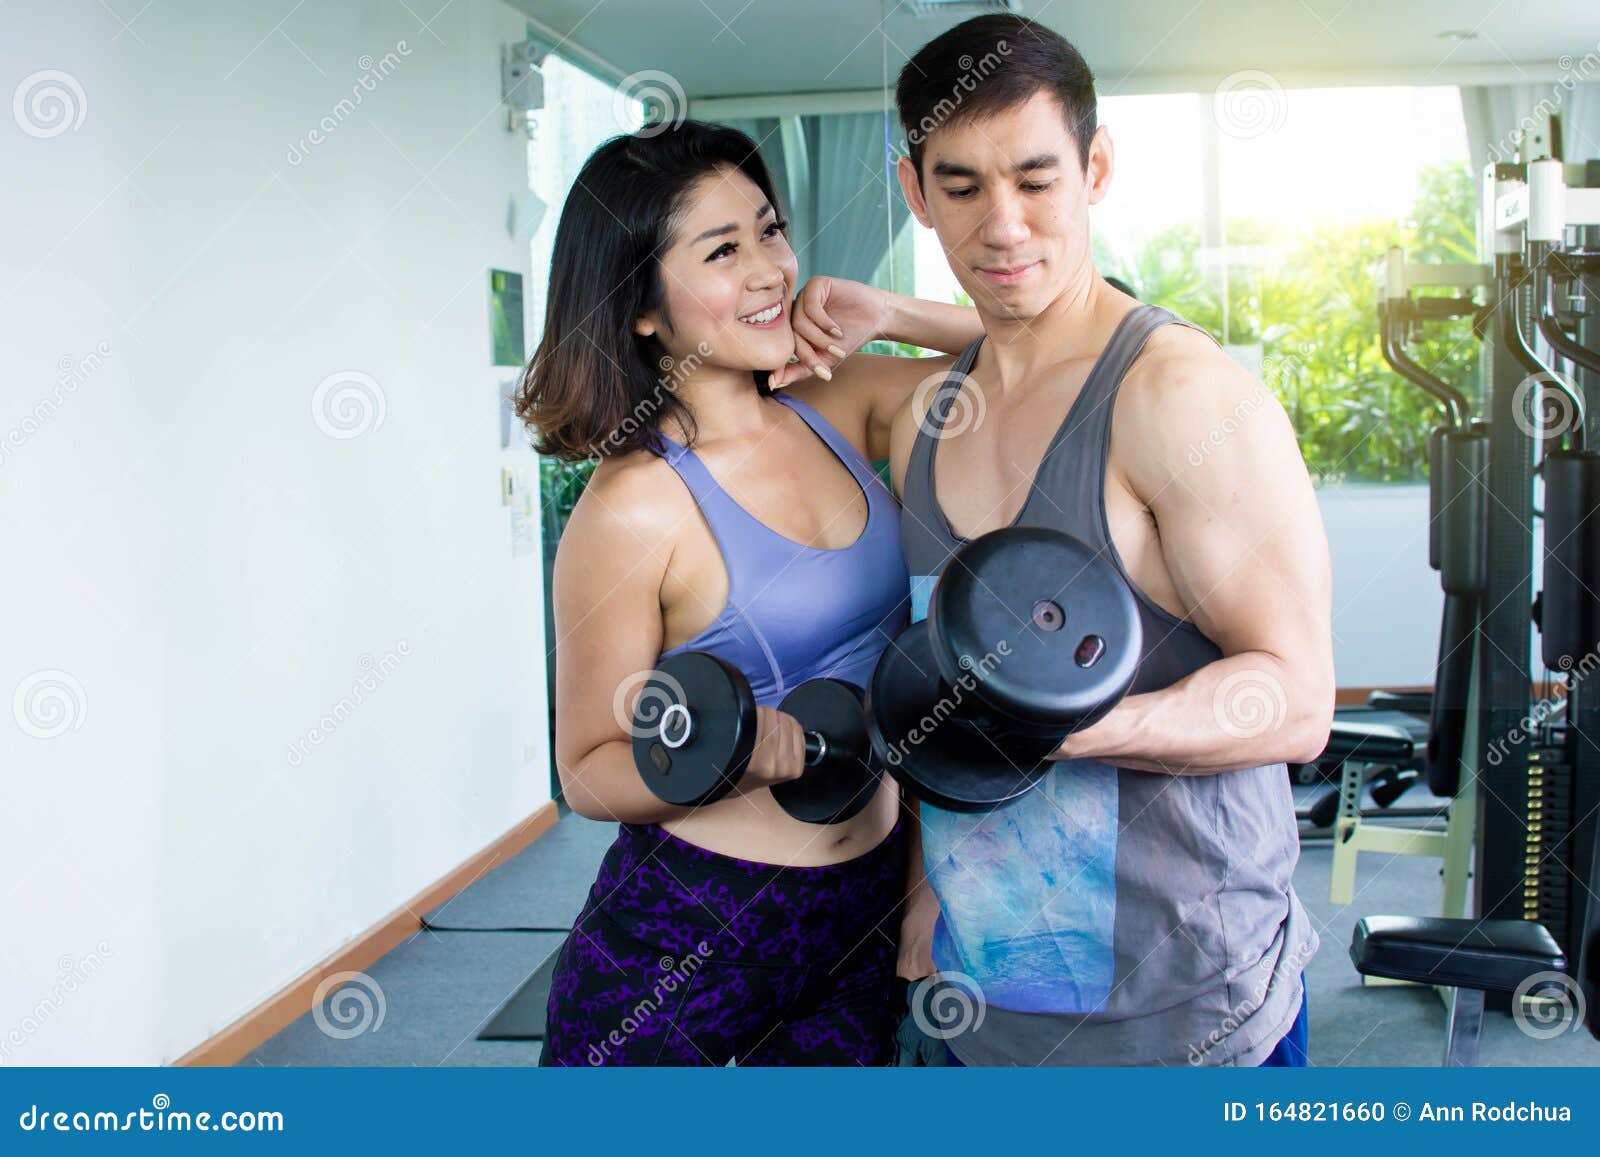 Sport Women In Akimbo Pose Doing Fitness With Single Arm Overhead Press  Dumbbell Illustration About Exercise Training Target To Arms Muscles Stock  Illustration - Download Image Now - iStock